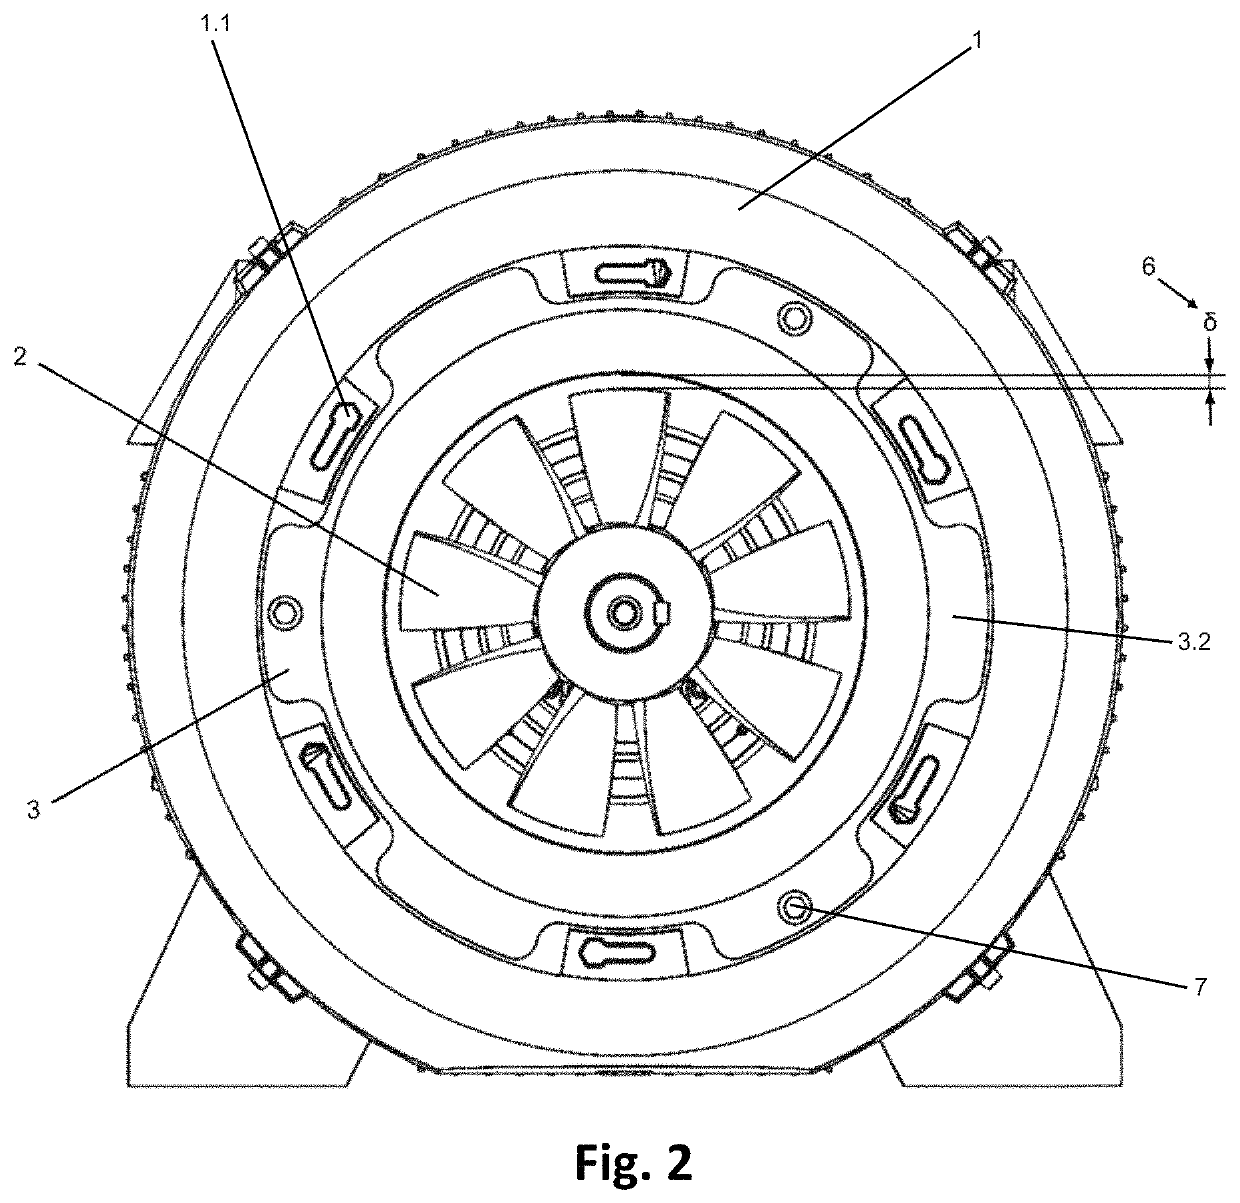 System for fixing the inner air deflector on deflective cover for rotating electrical machine